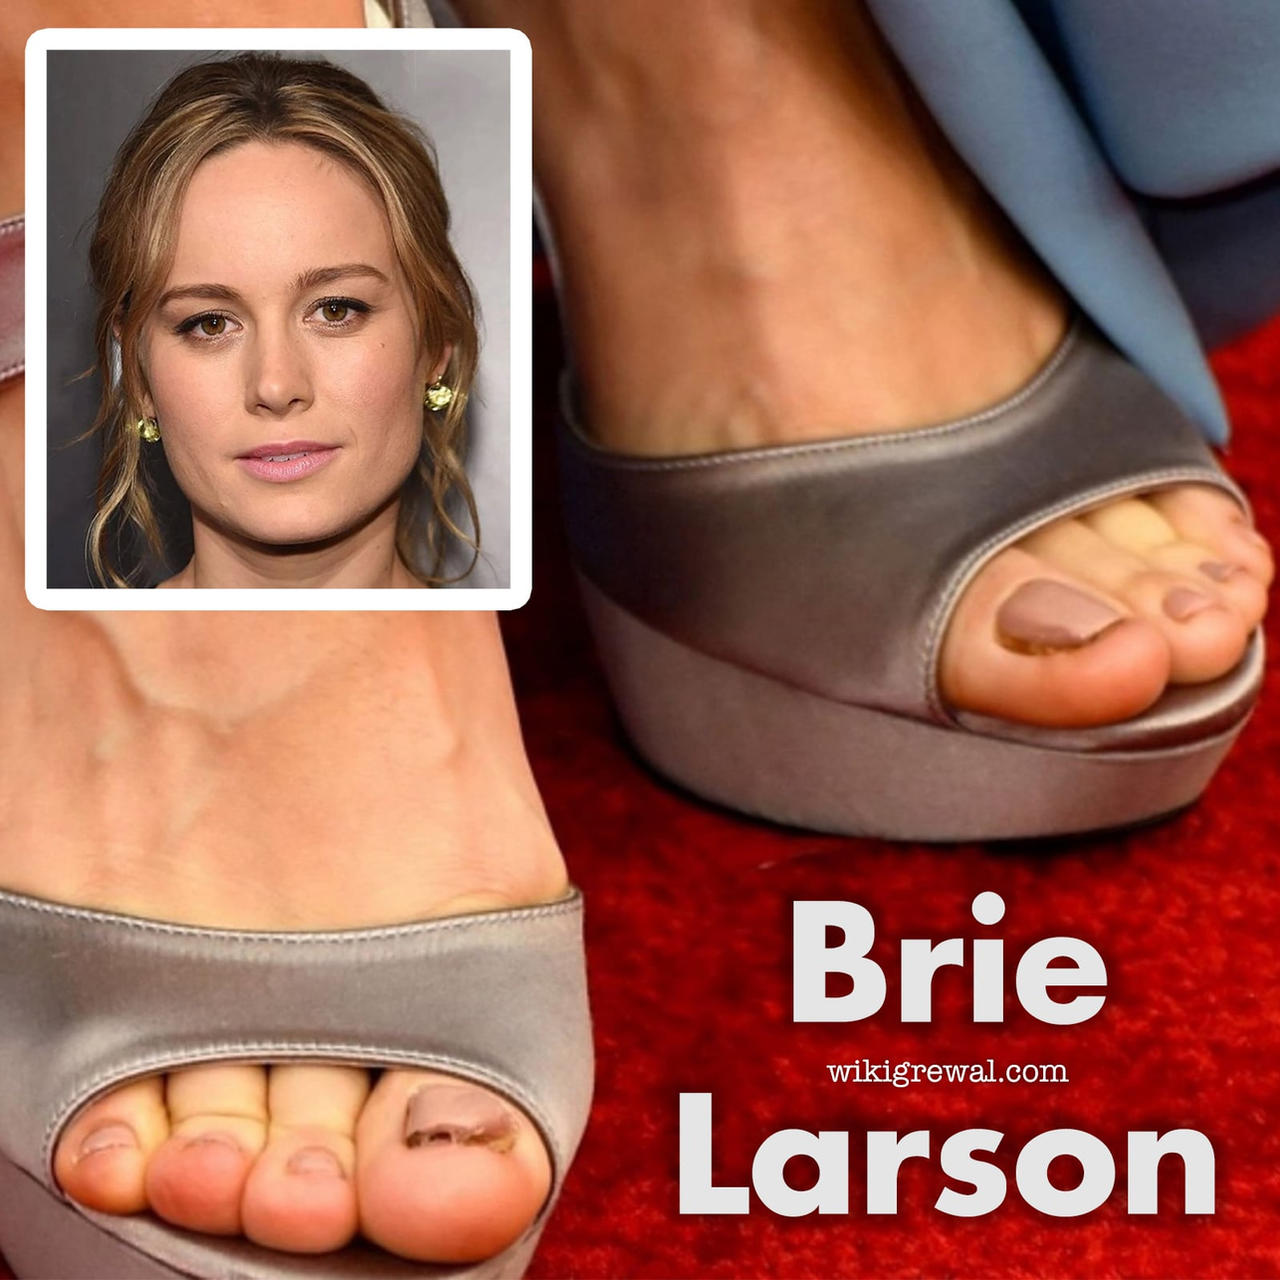 brie_larson_feet_by_topmotionclips_dfccdvl-fullview.jpg